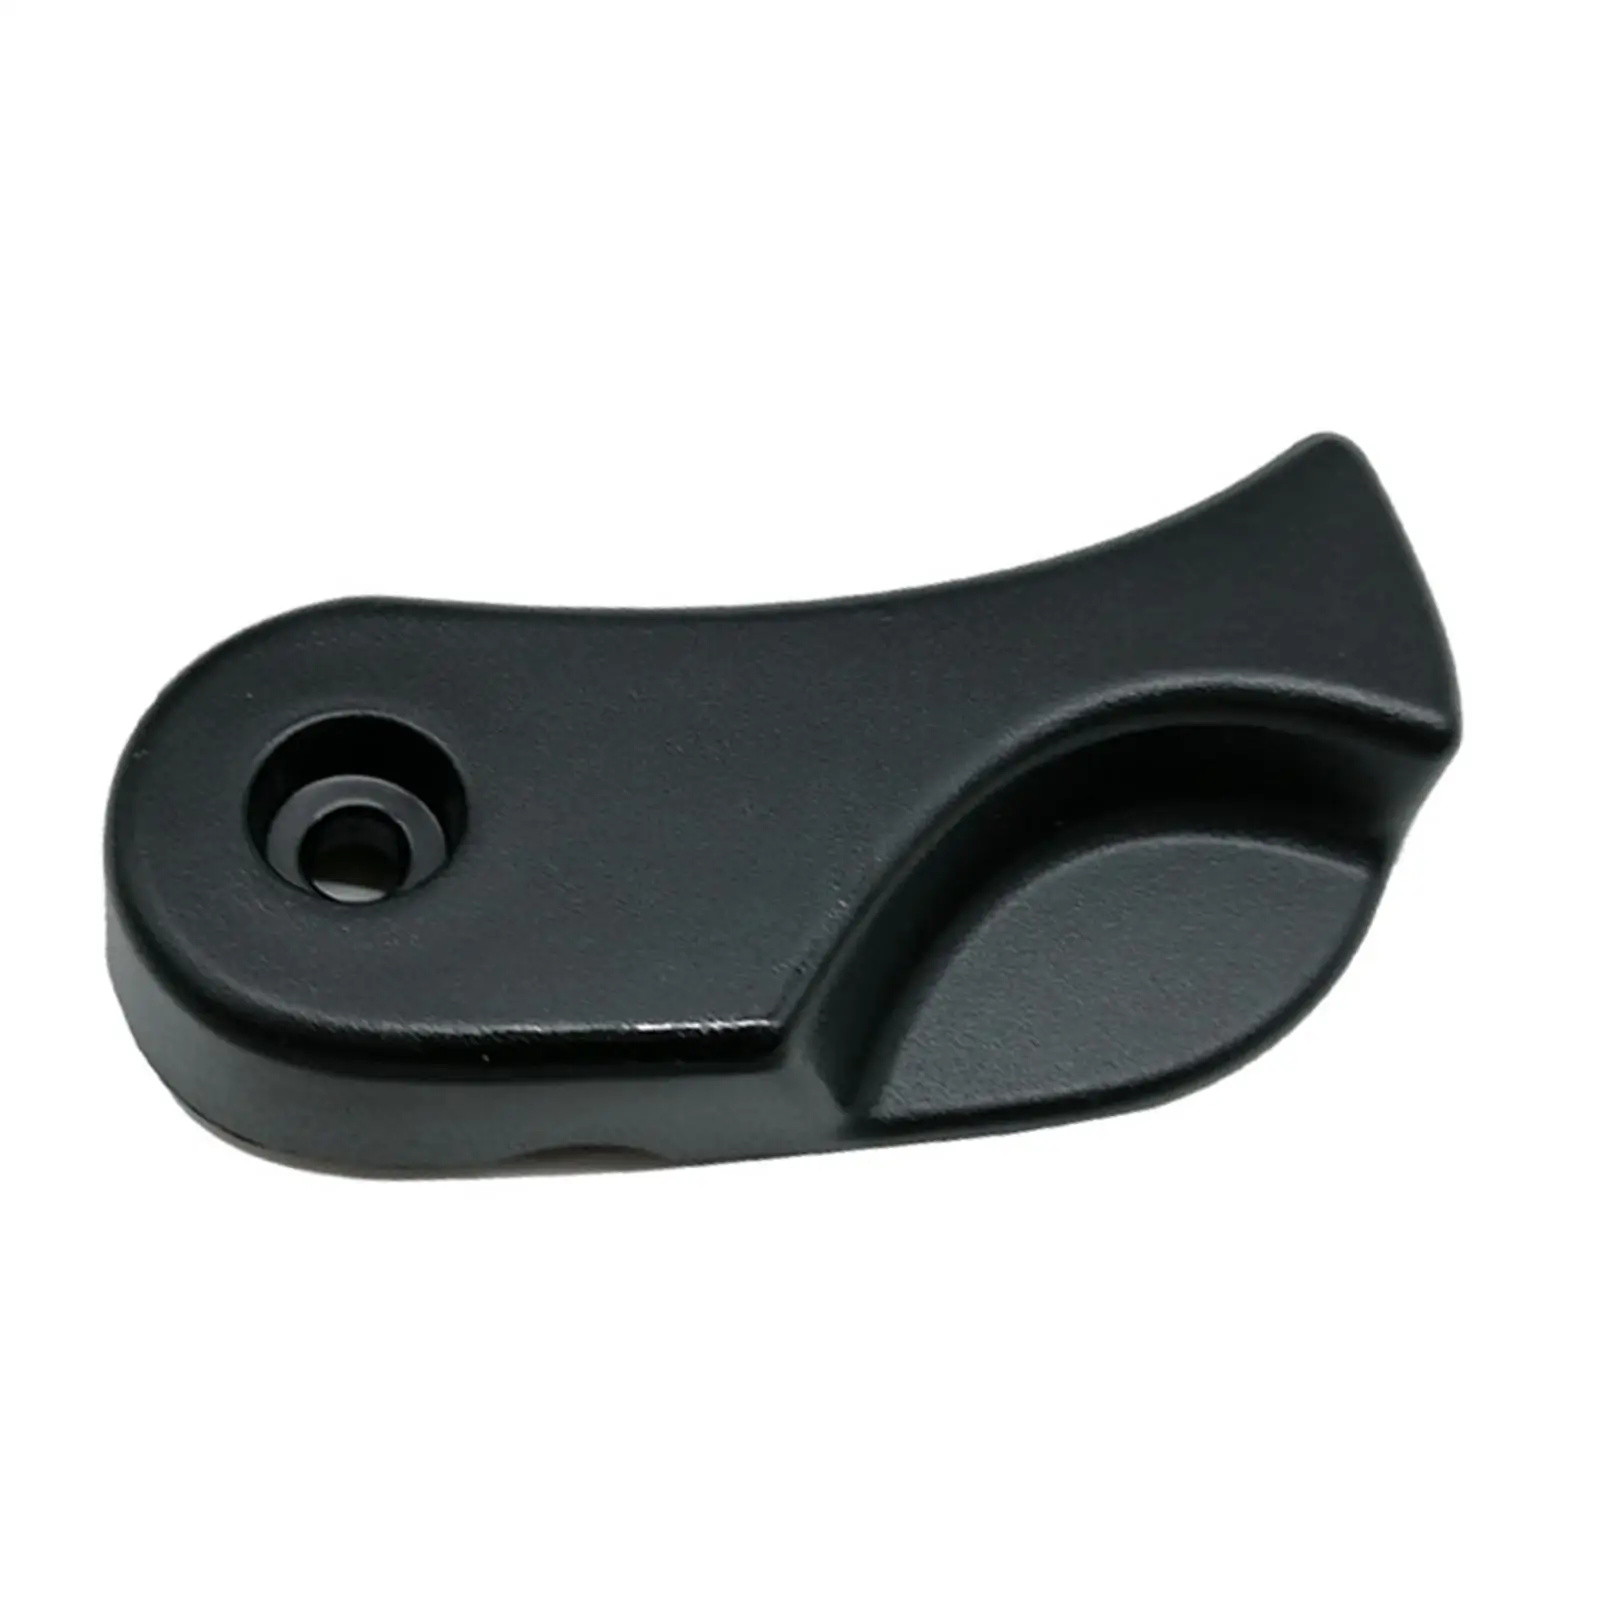 Hood Release Handle Accessory Car Hood Bonnet Release Handle for BMW 3 Series Replacement Easily Install Premium